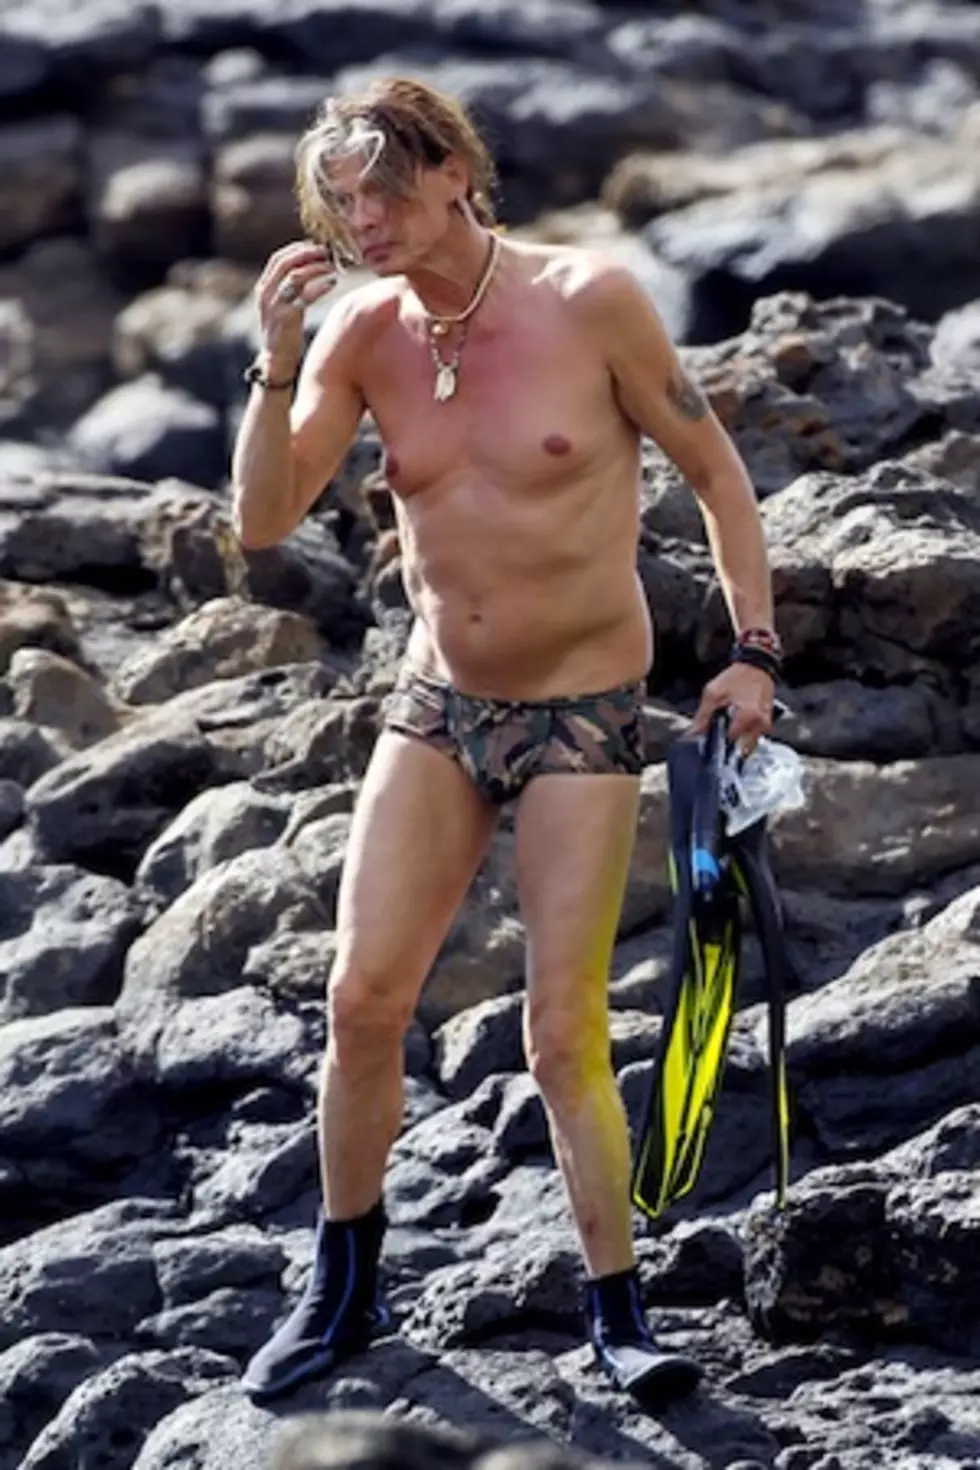 Thanks to a New Law in Hawaii, Steven Tyler Has the Freedom to &#8216;Walk Around Naked&#8217;